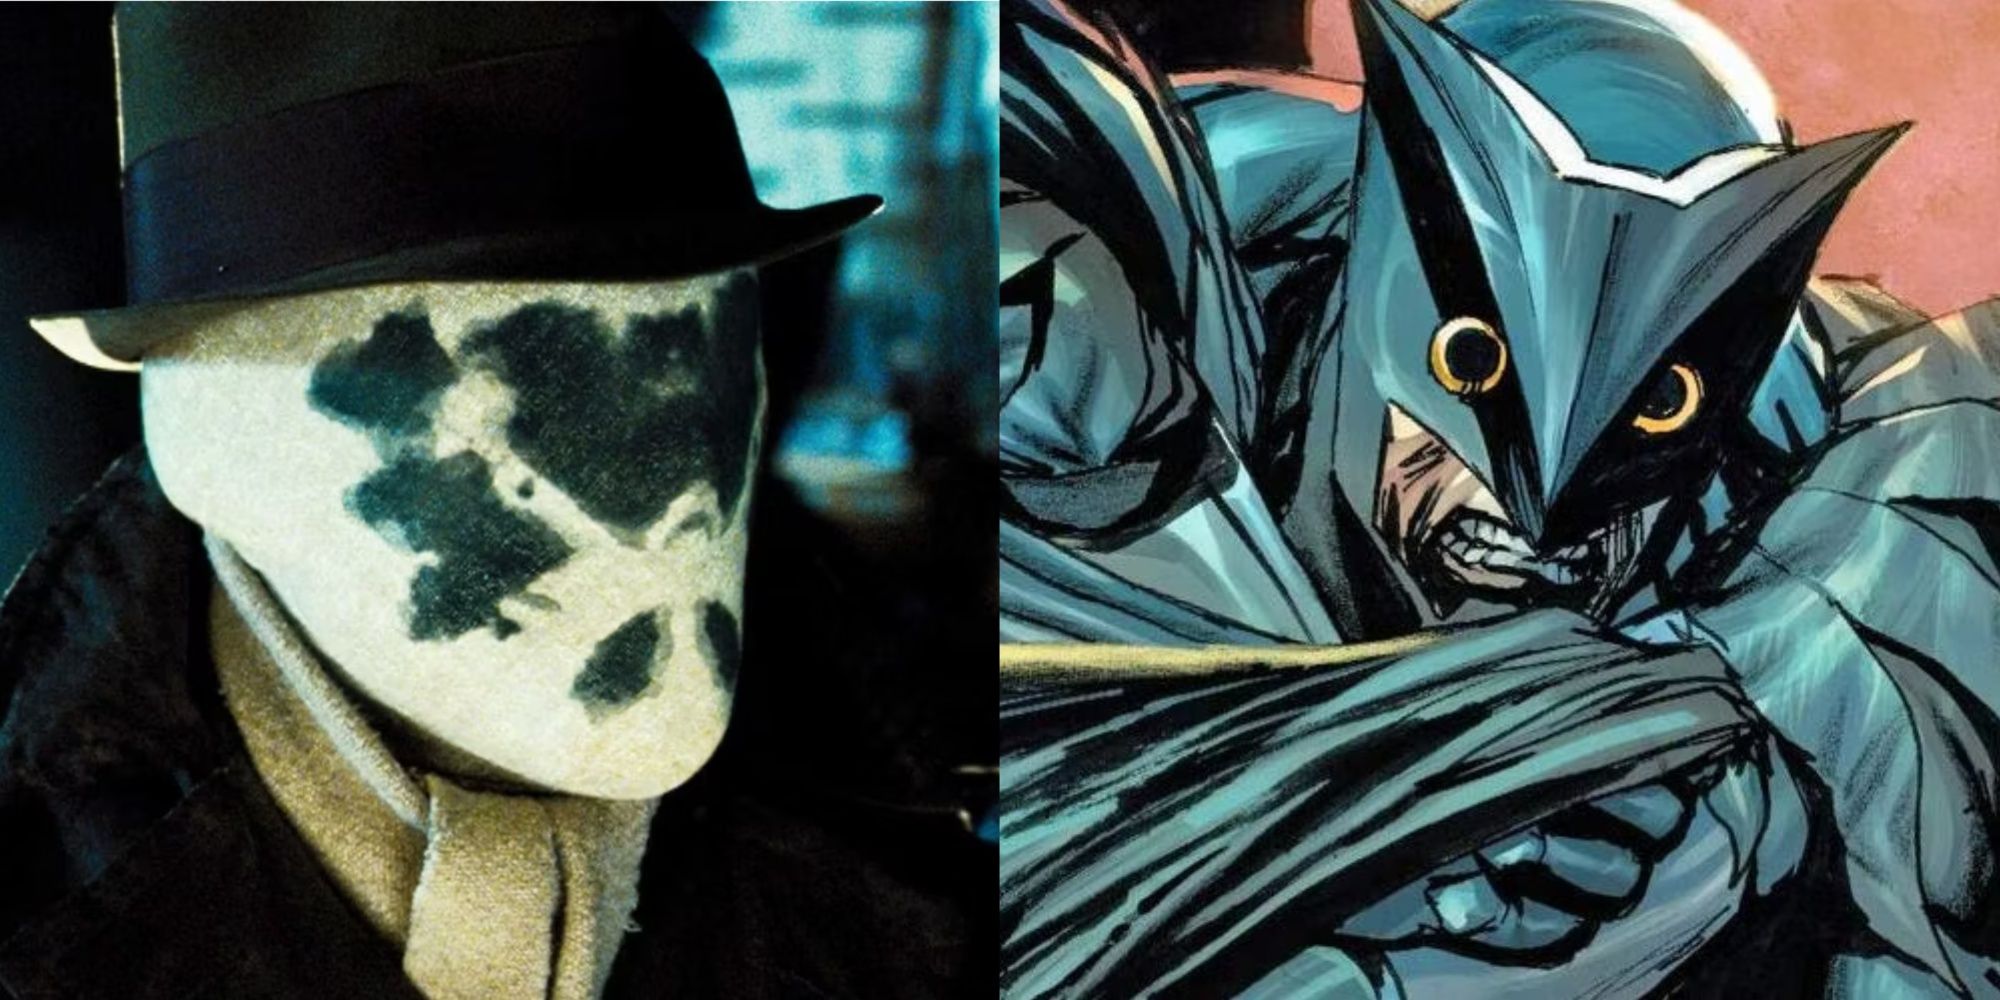 A split image of Rorscharch from Watchmen live-action, Owlman from DC Comics